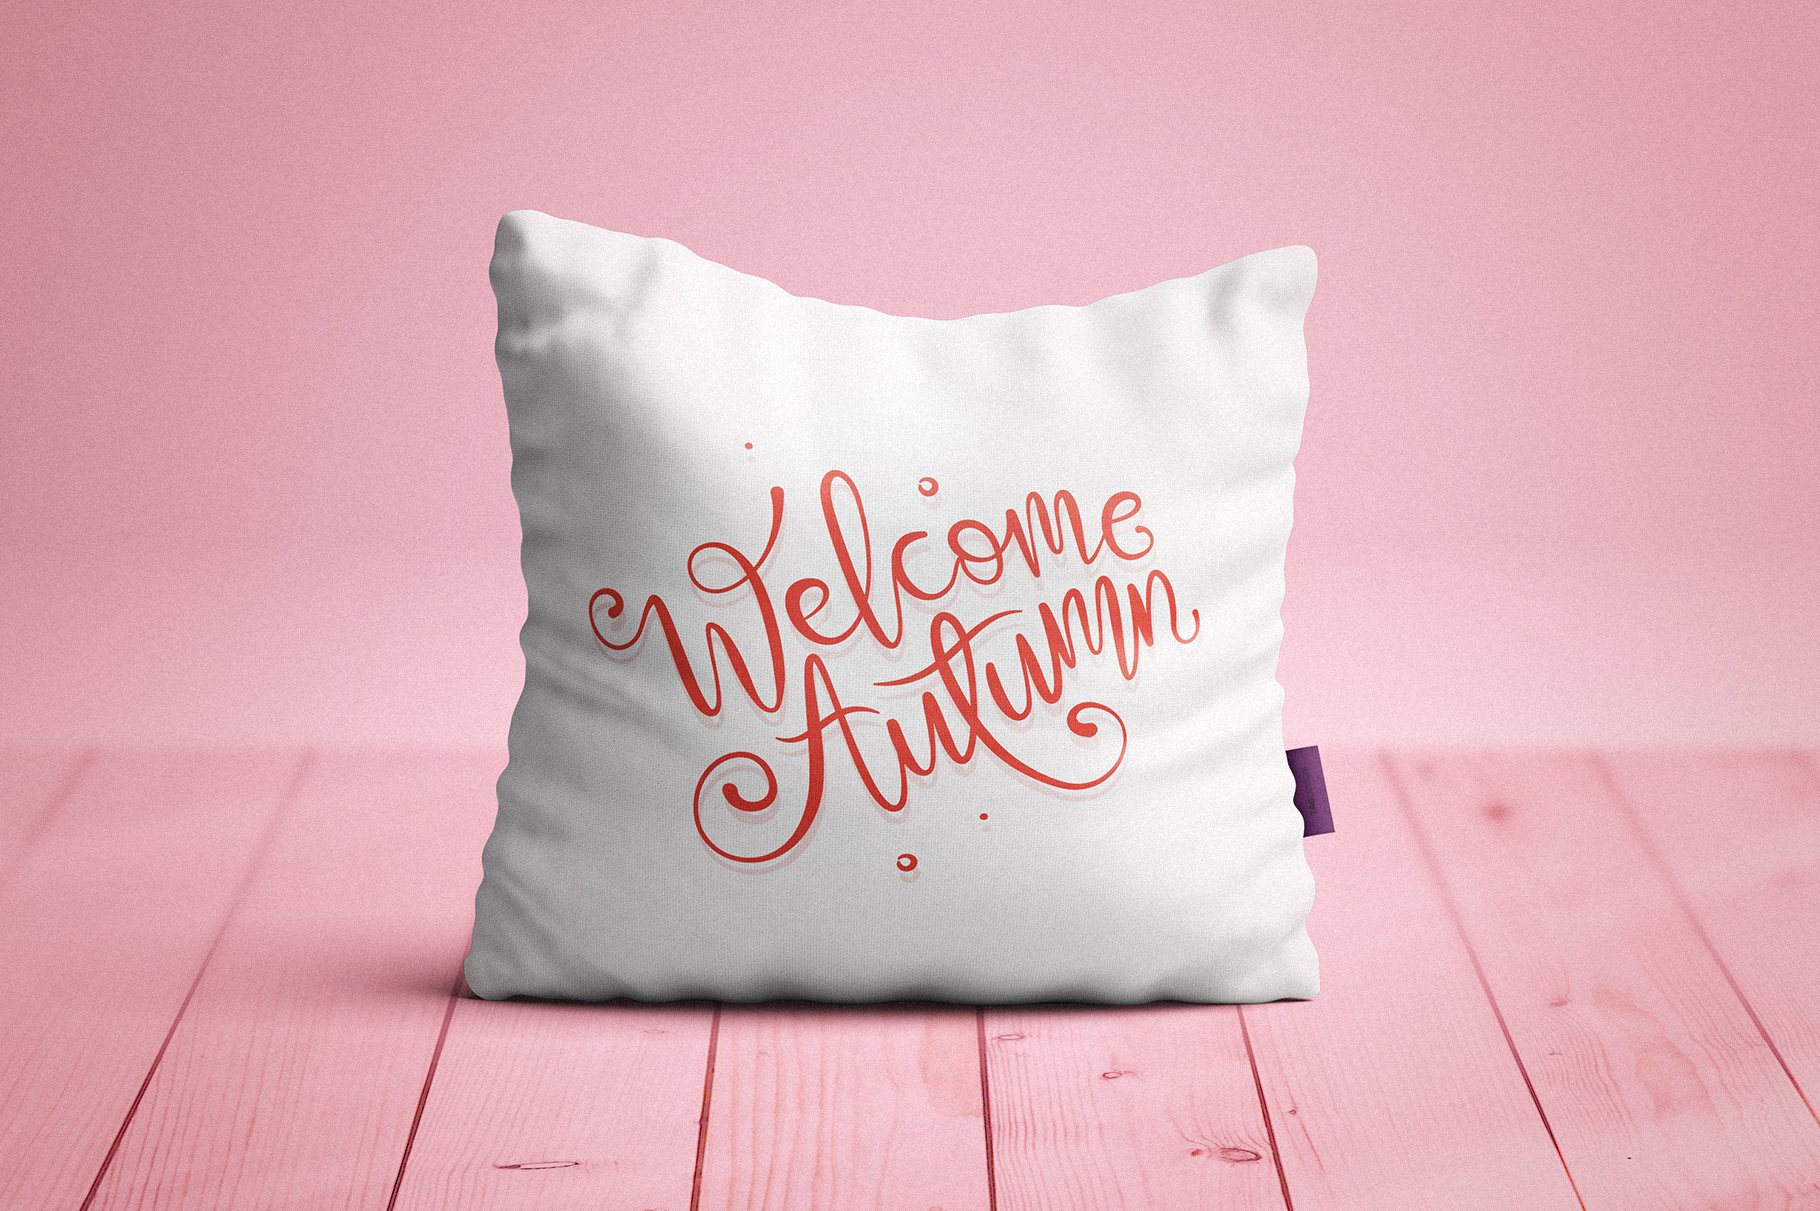 White pillow with a pink phrase.